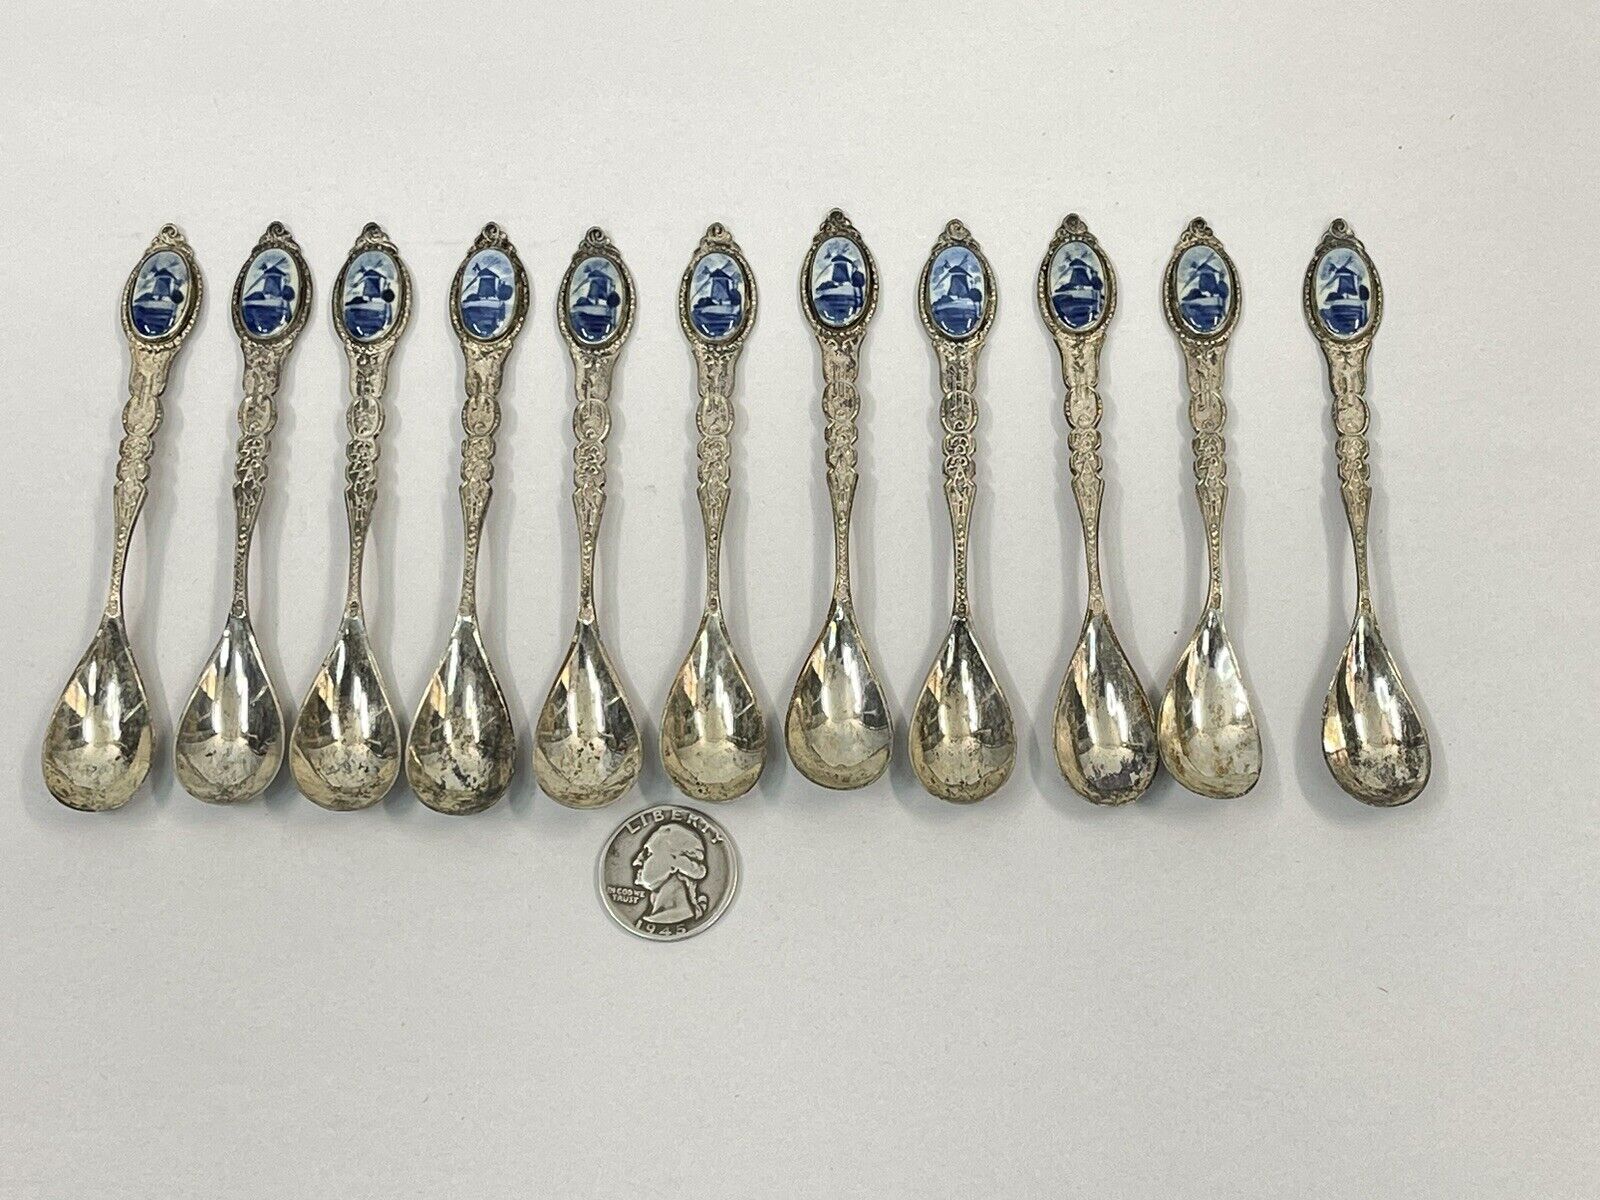 11 Vintage Holland Delft Blue Windmill Cameo Silverplate Souvenir Spoons